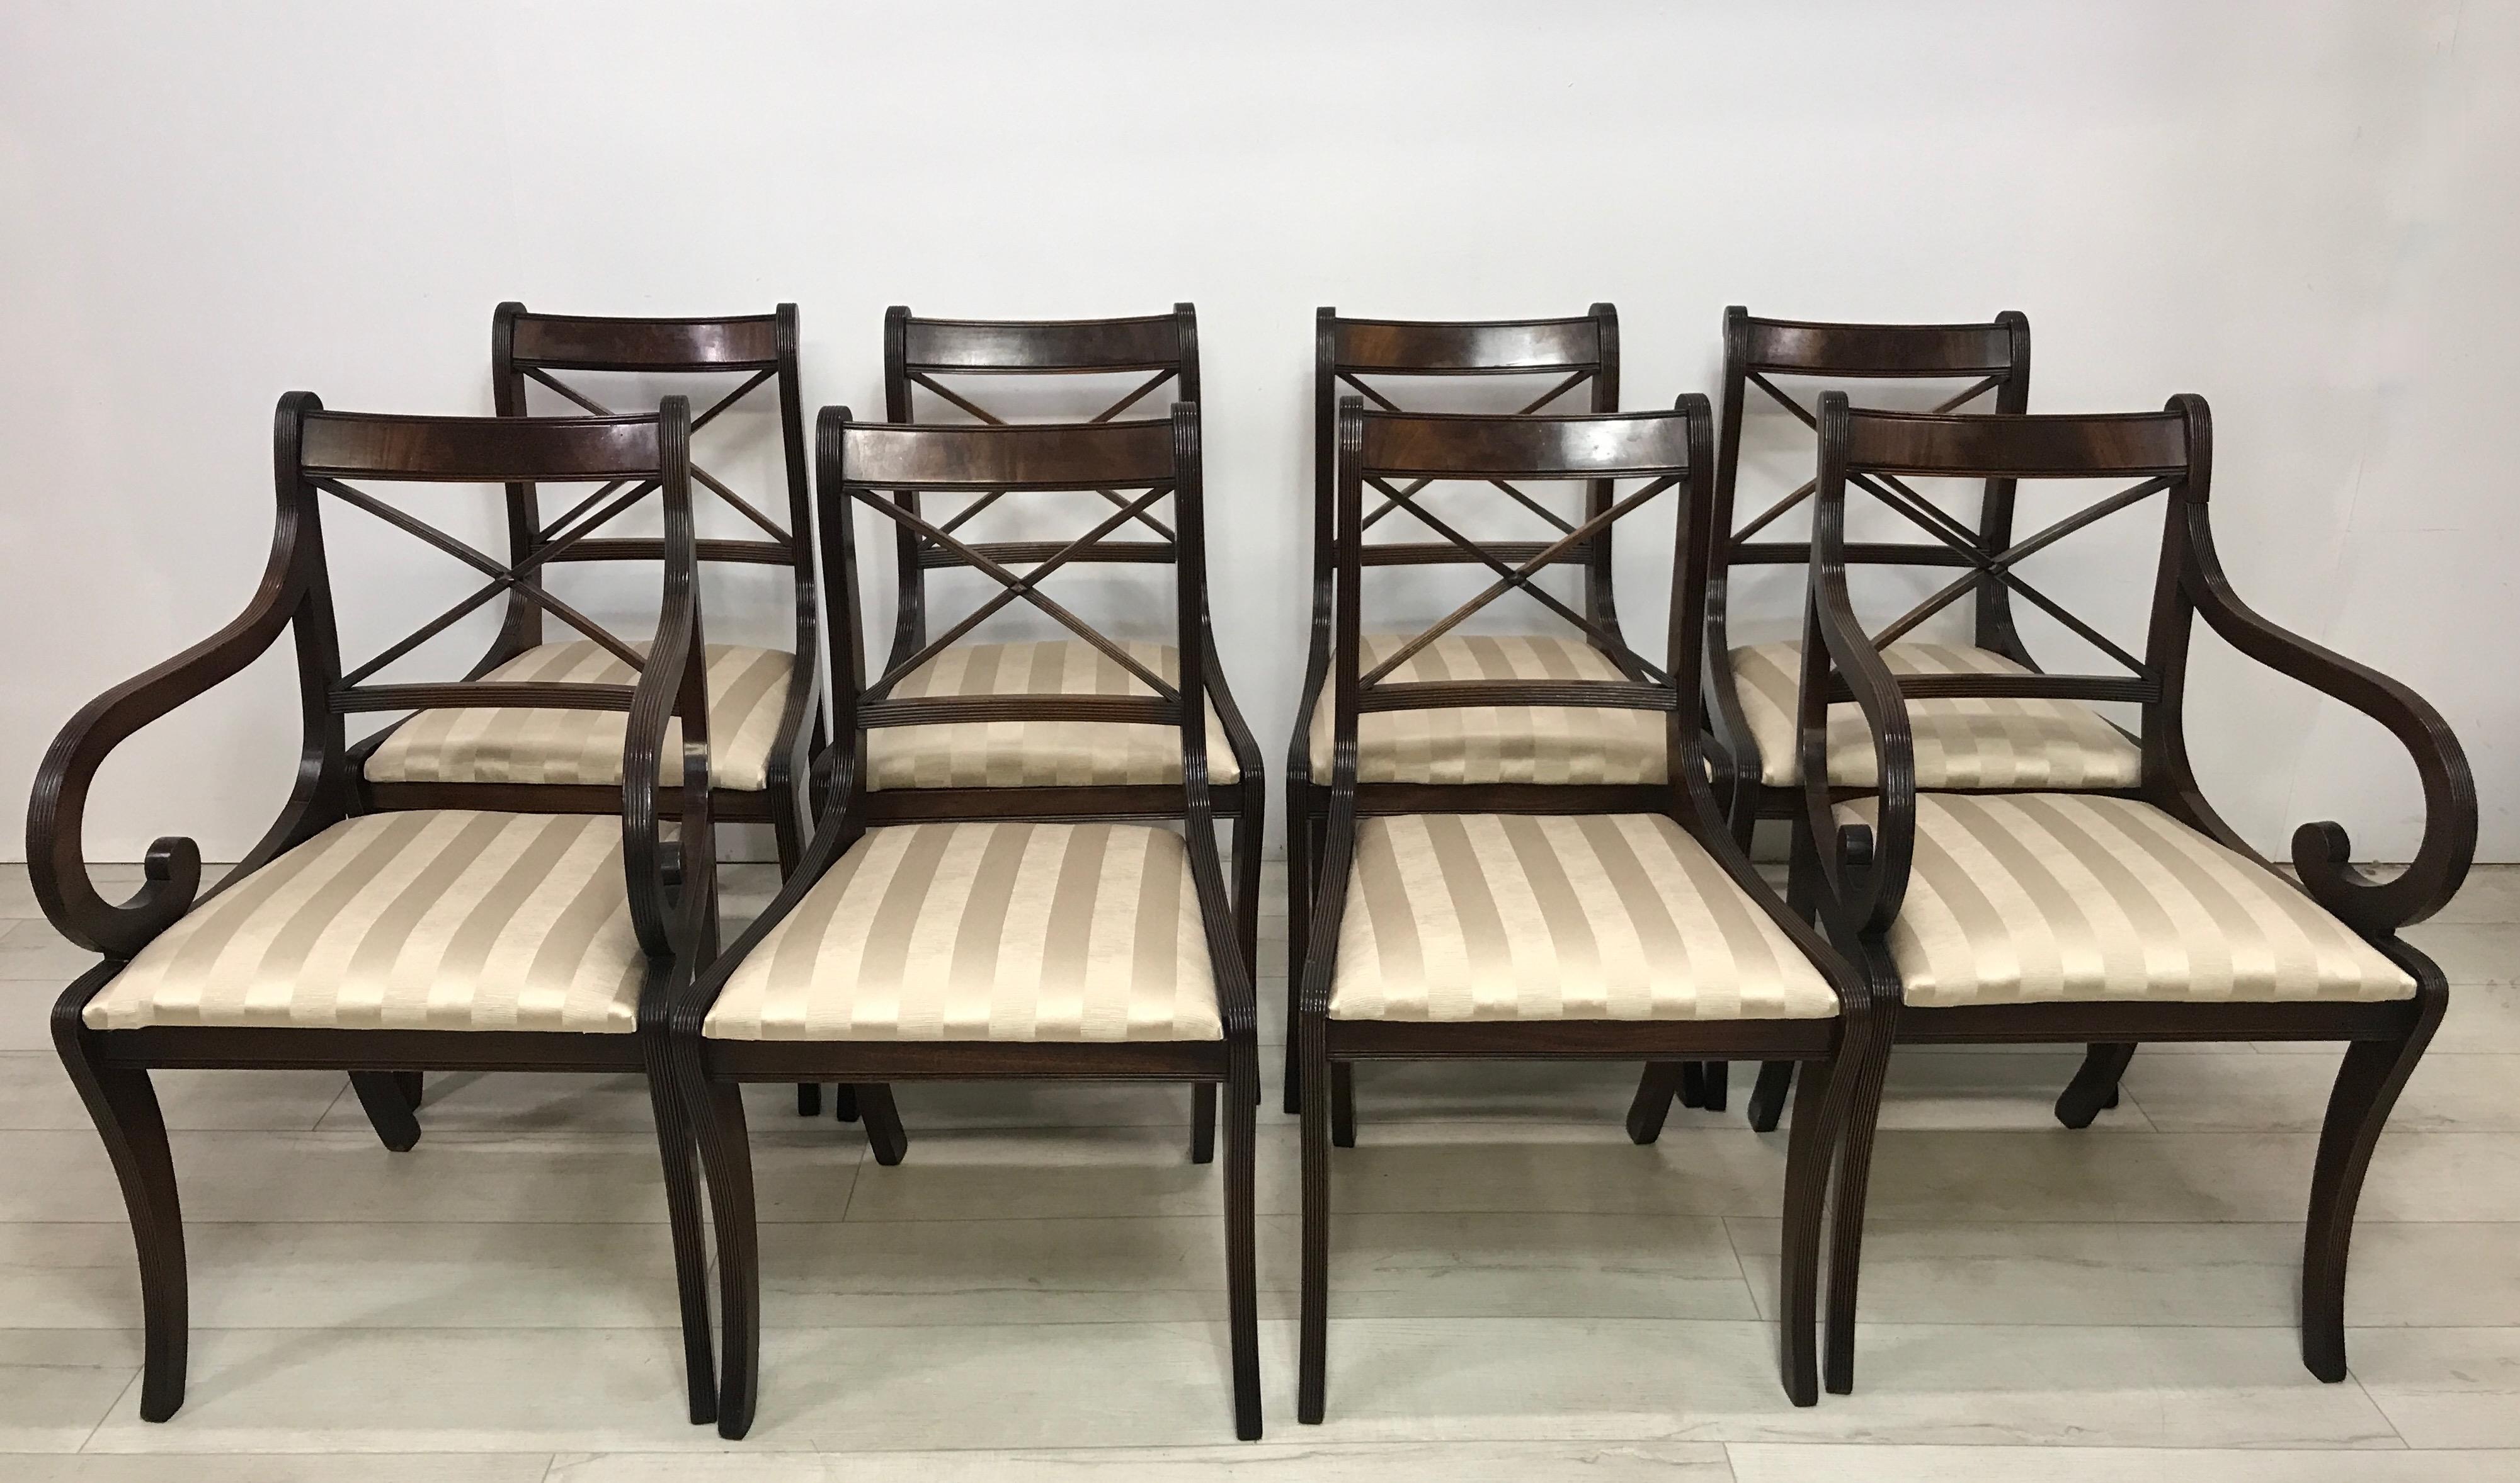 A set of eight English Regency style mahogany dining chairs, consisting of six side chairs and two armchairs.
These are high quality American reproduction, made in the second half of the 20th century.
Recently refreshed and reconditioned with new